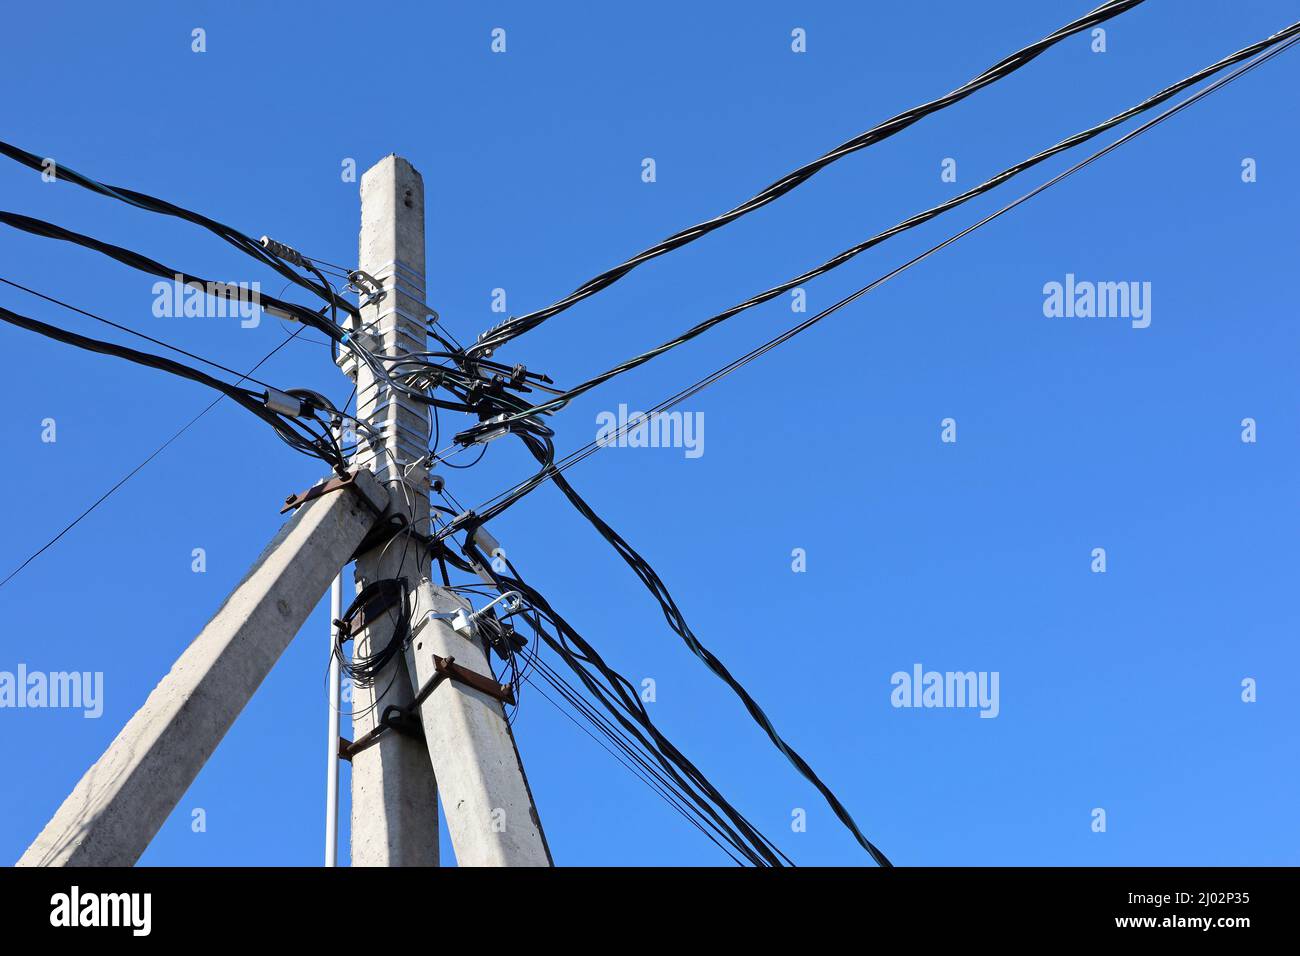 Power line post with tangled electrical wires and capacitors on blue sky background. Electricity transmission line, power supply Stock Photo